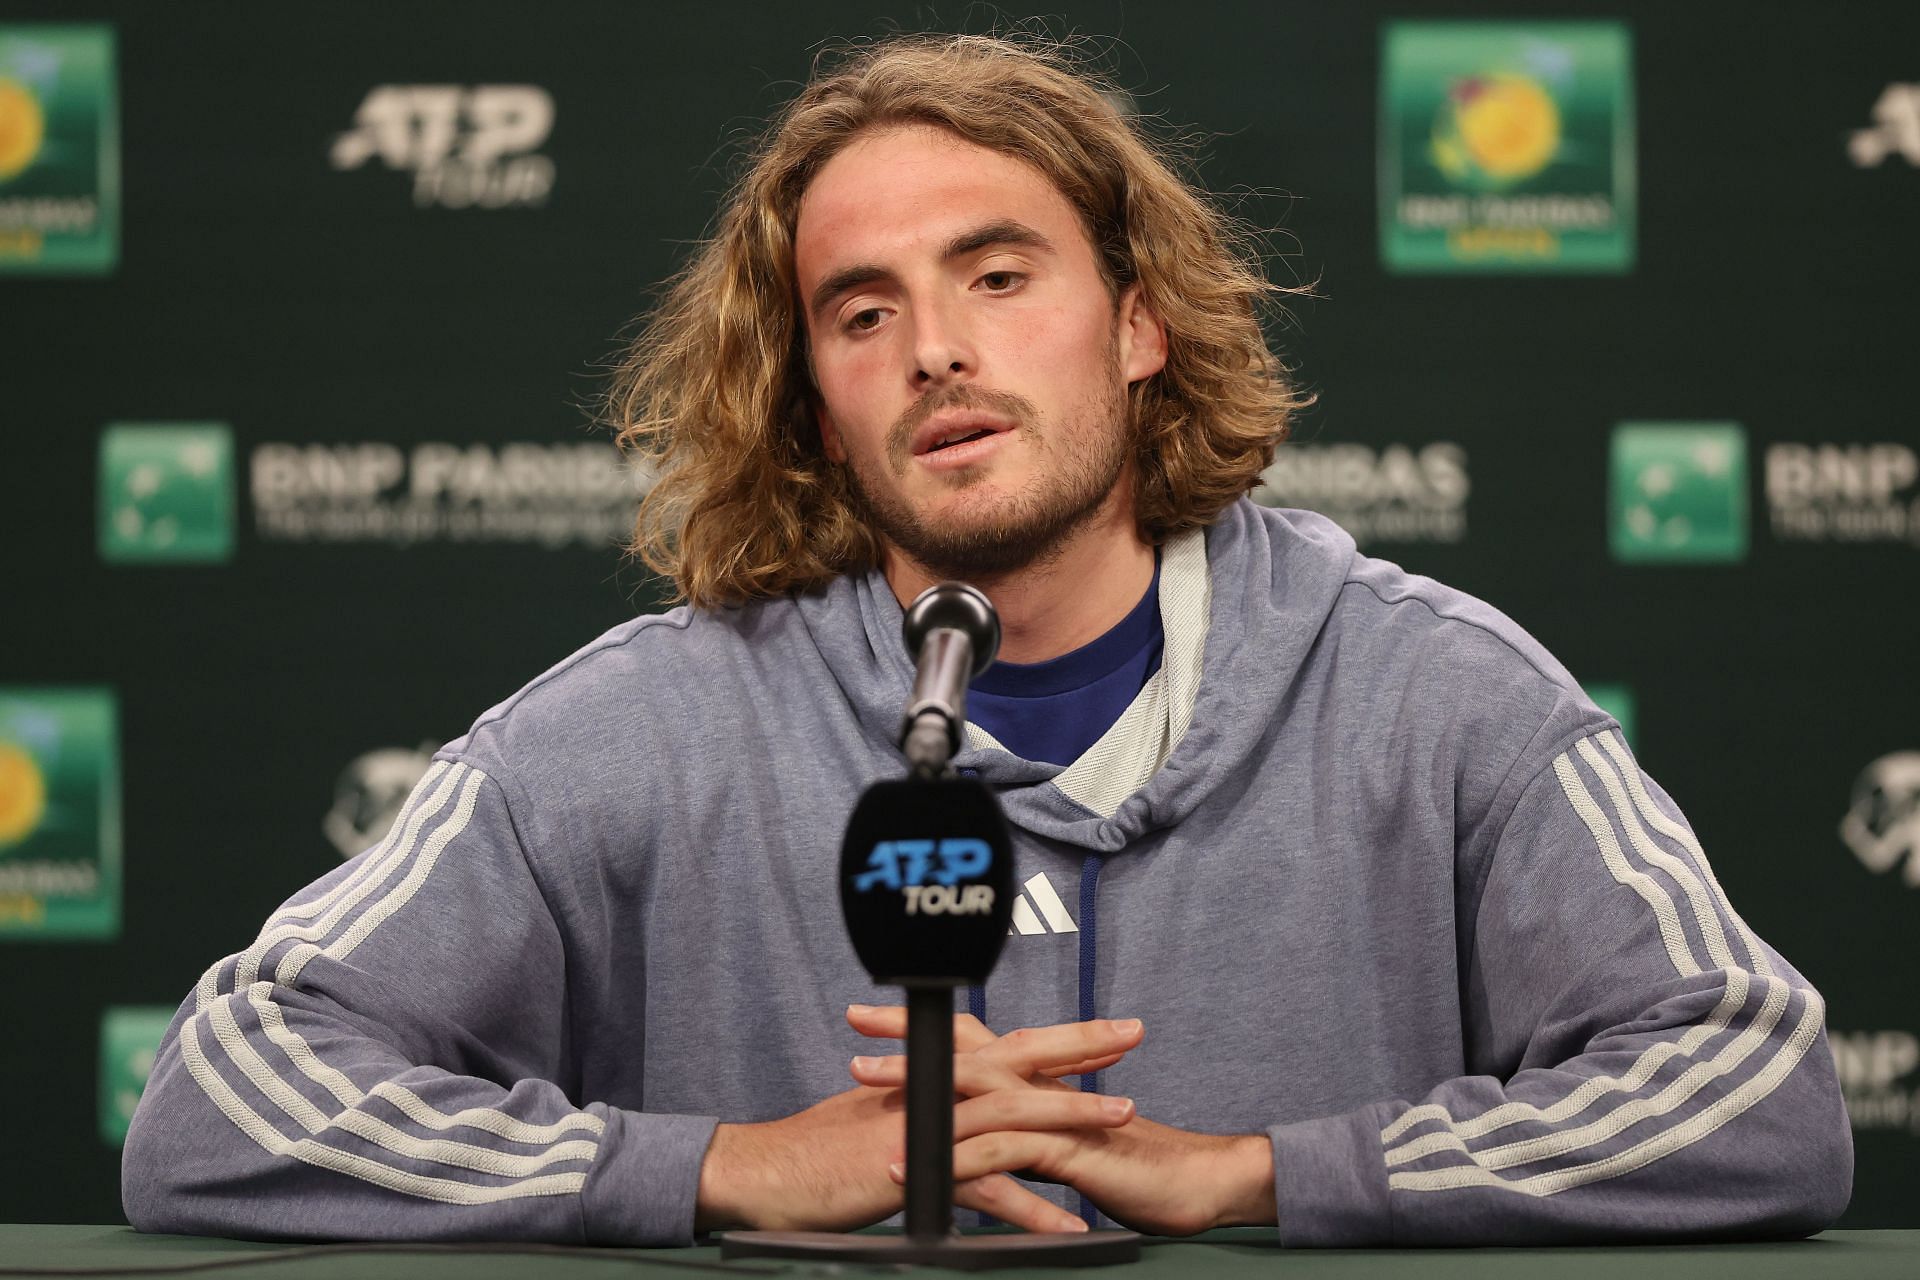 Stefanos Tsitsipas at the 2023 Indian Wells - Day 3